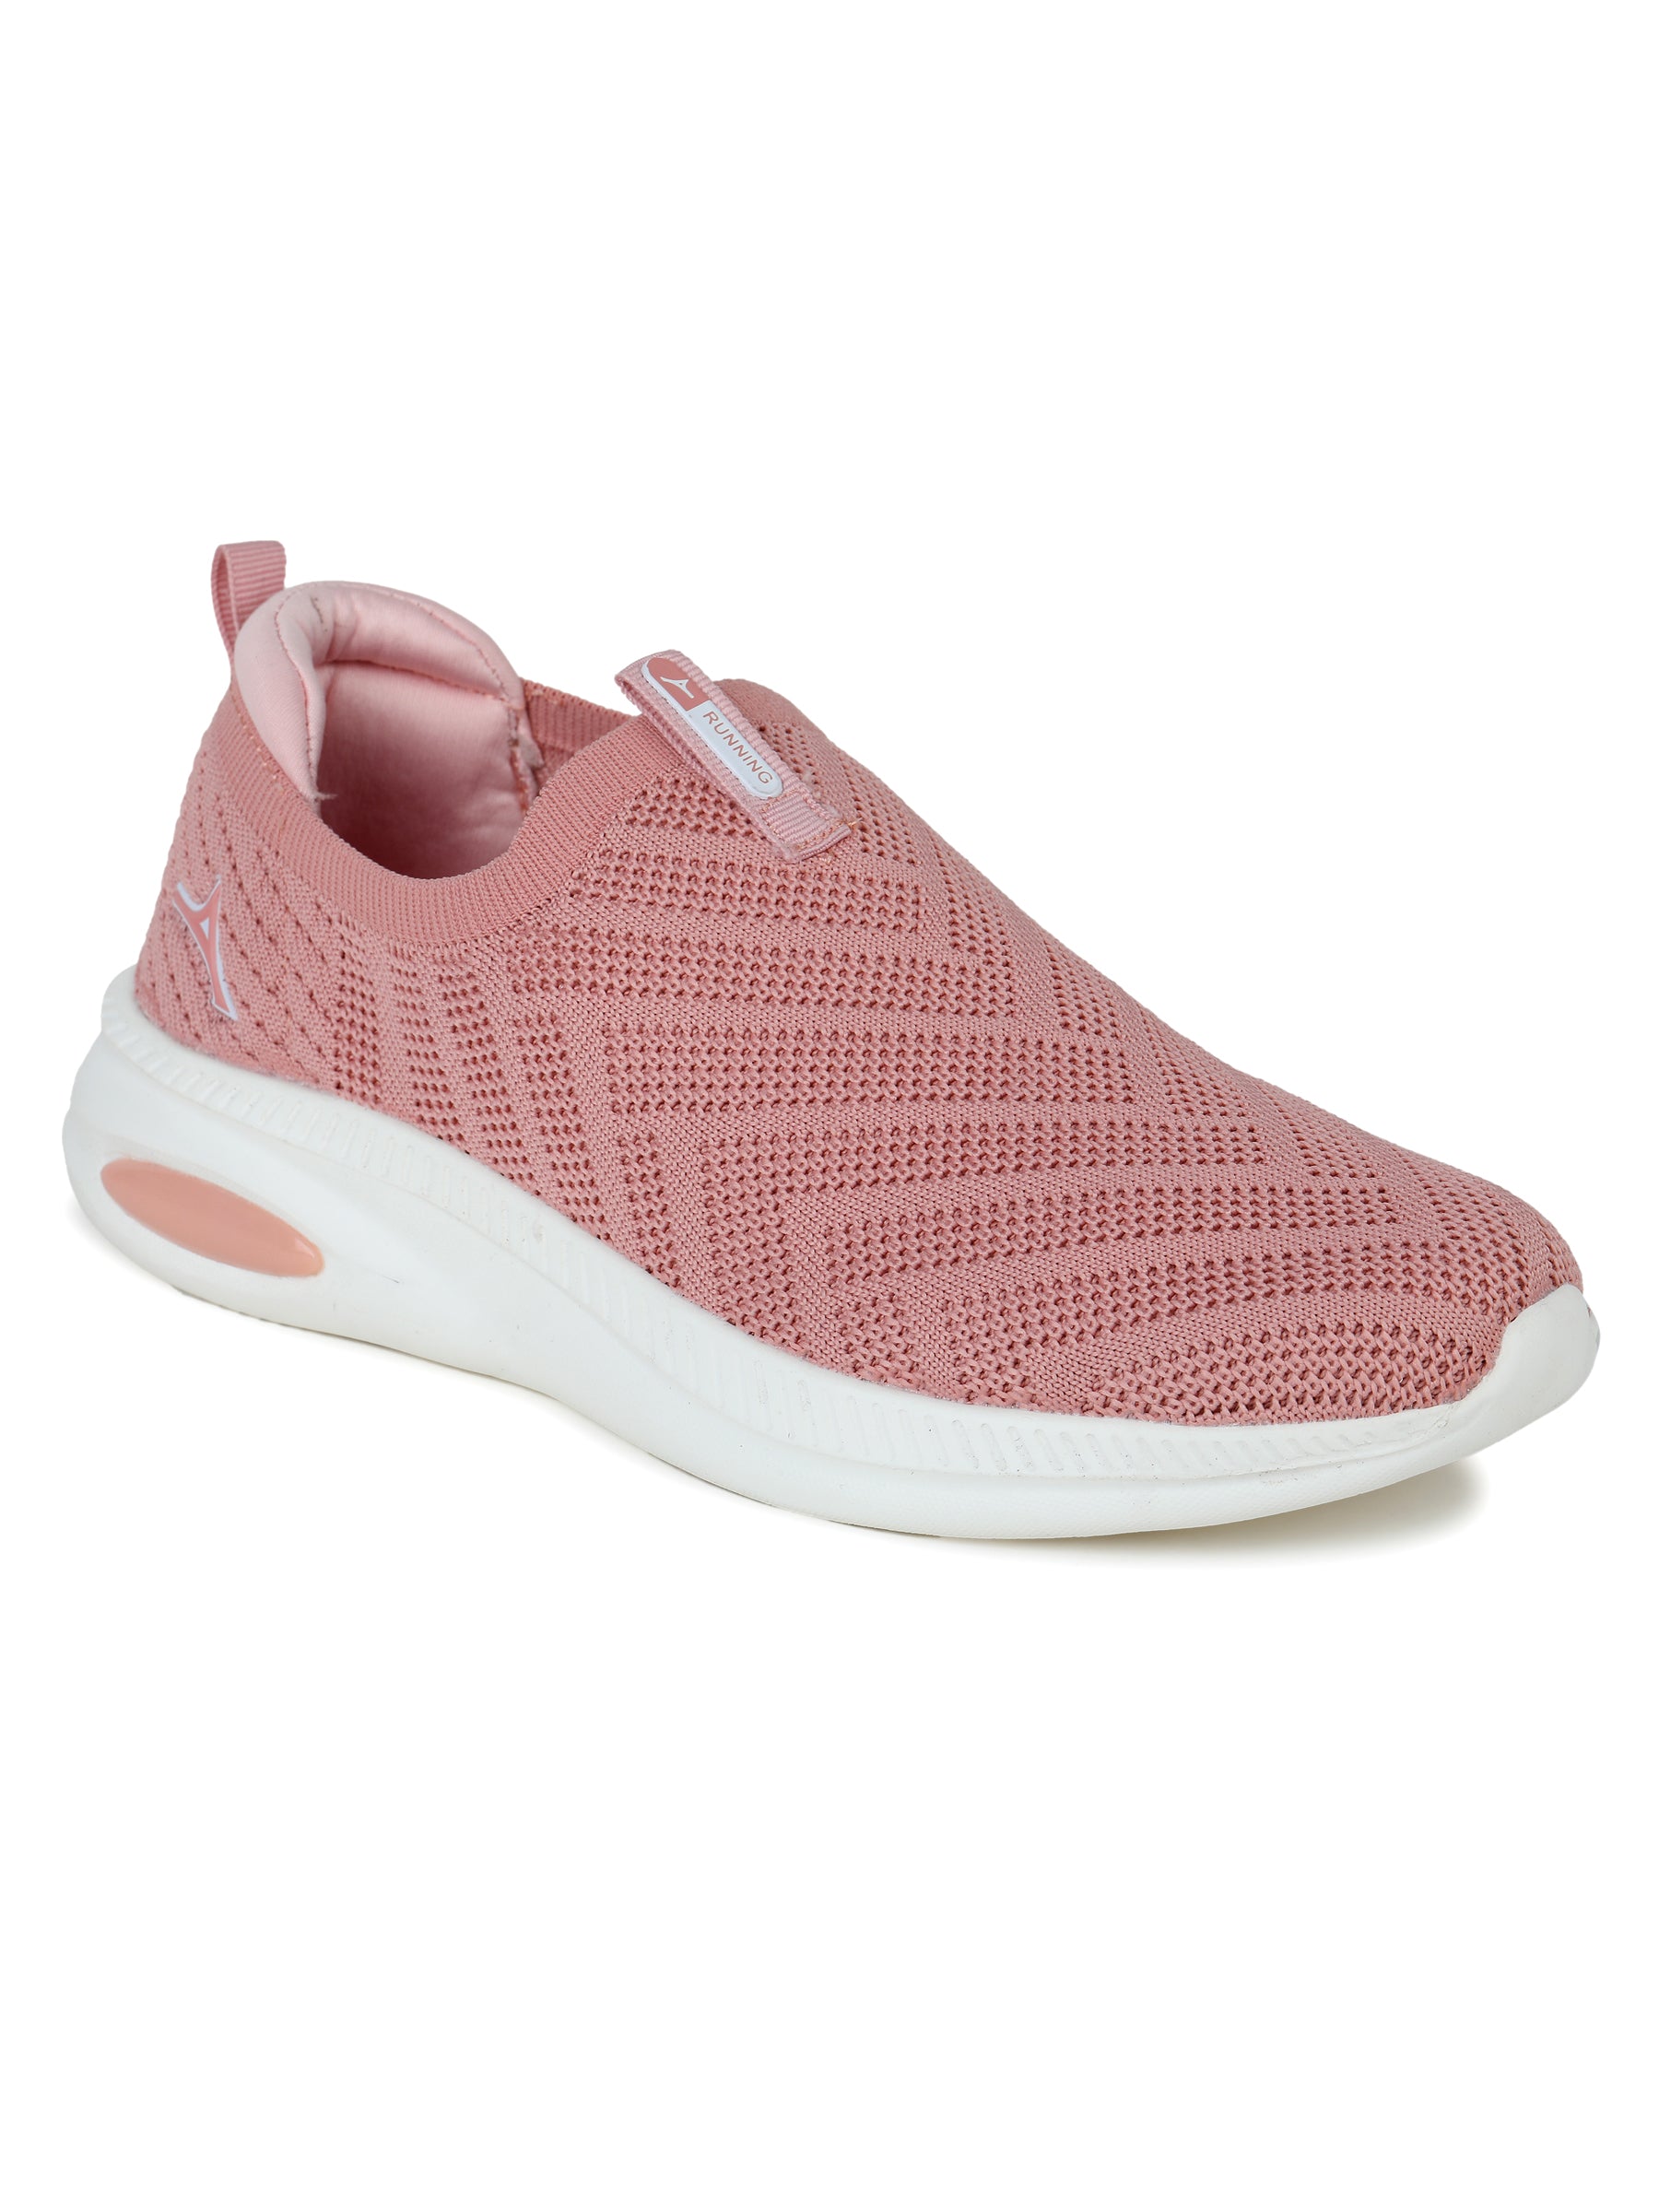 ABROS LOTUS SPORTS SHOES FOR WOMEN